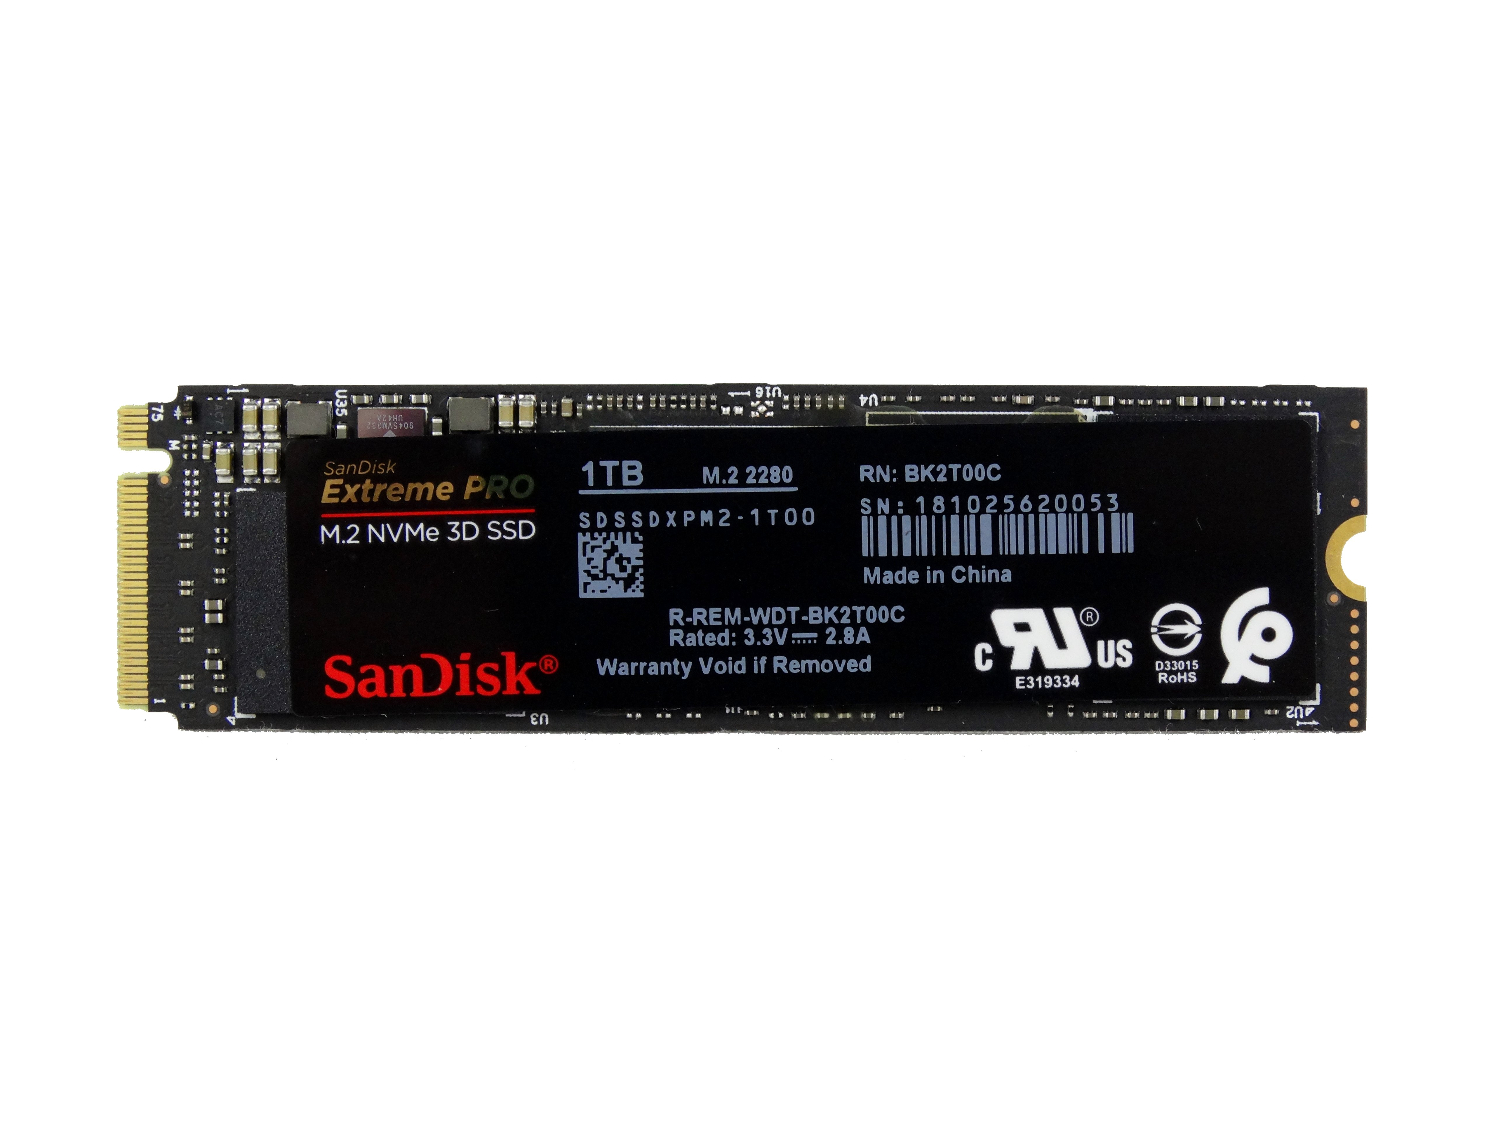 SanDisk Extreme Pro M.2 NVMe 3D SSD review: High-end performance at bargain  prices